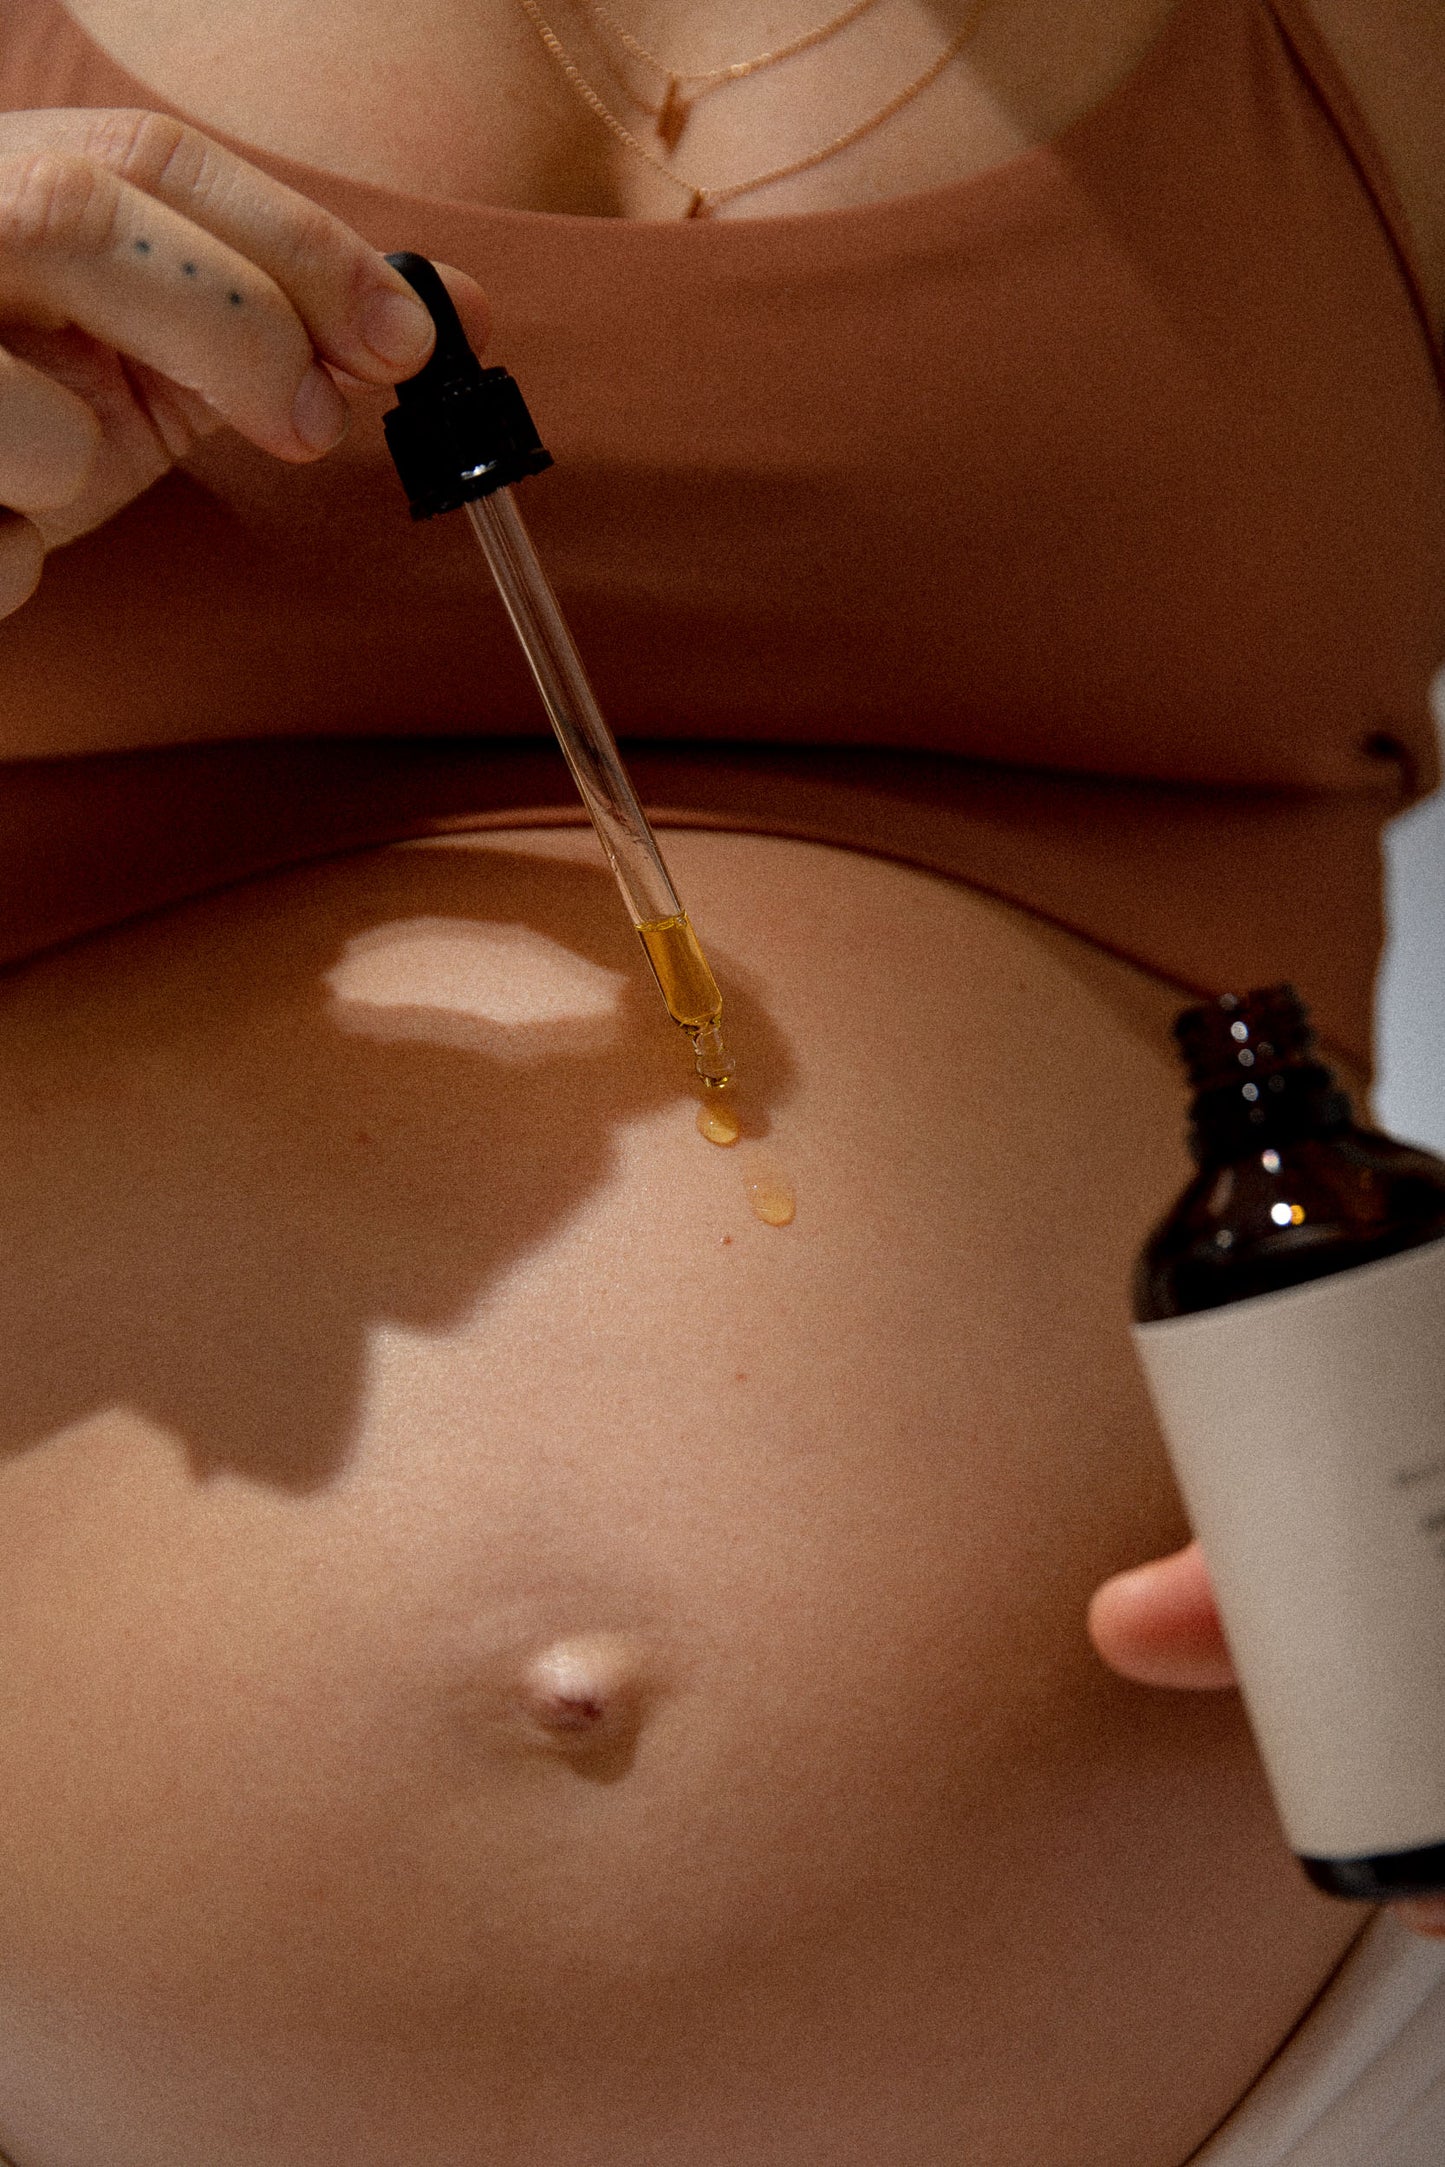 mama's belly oil